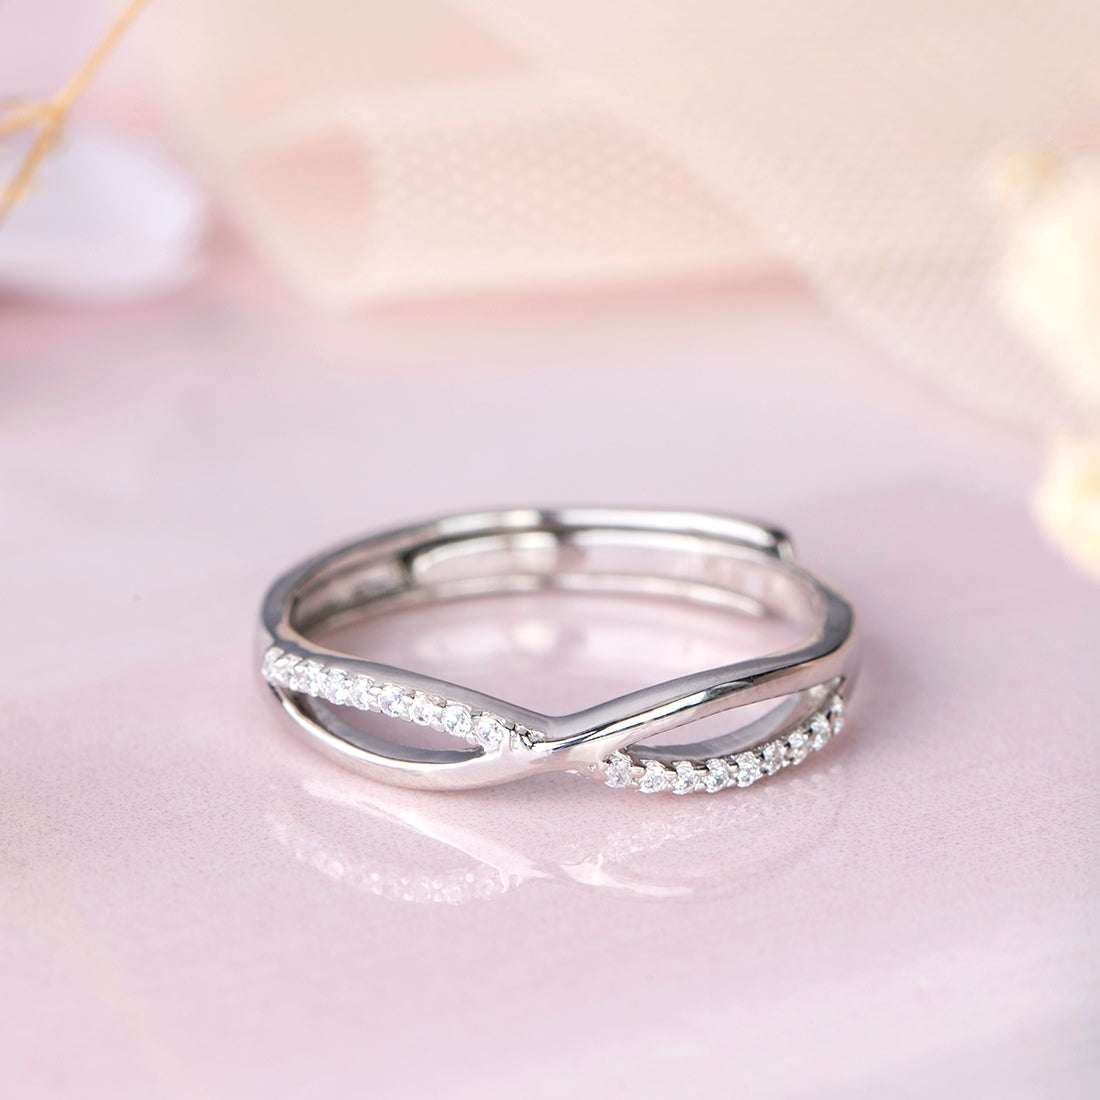 Endless Sparkle Rhodium-Plated 925 Sterling Silver Infinity Ring for Her (Adjustable)